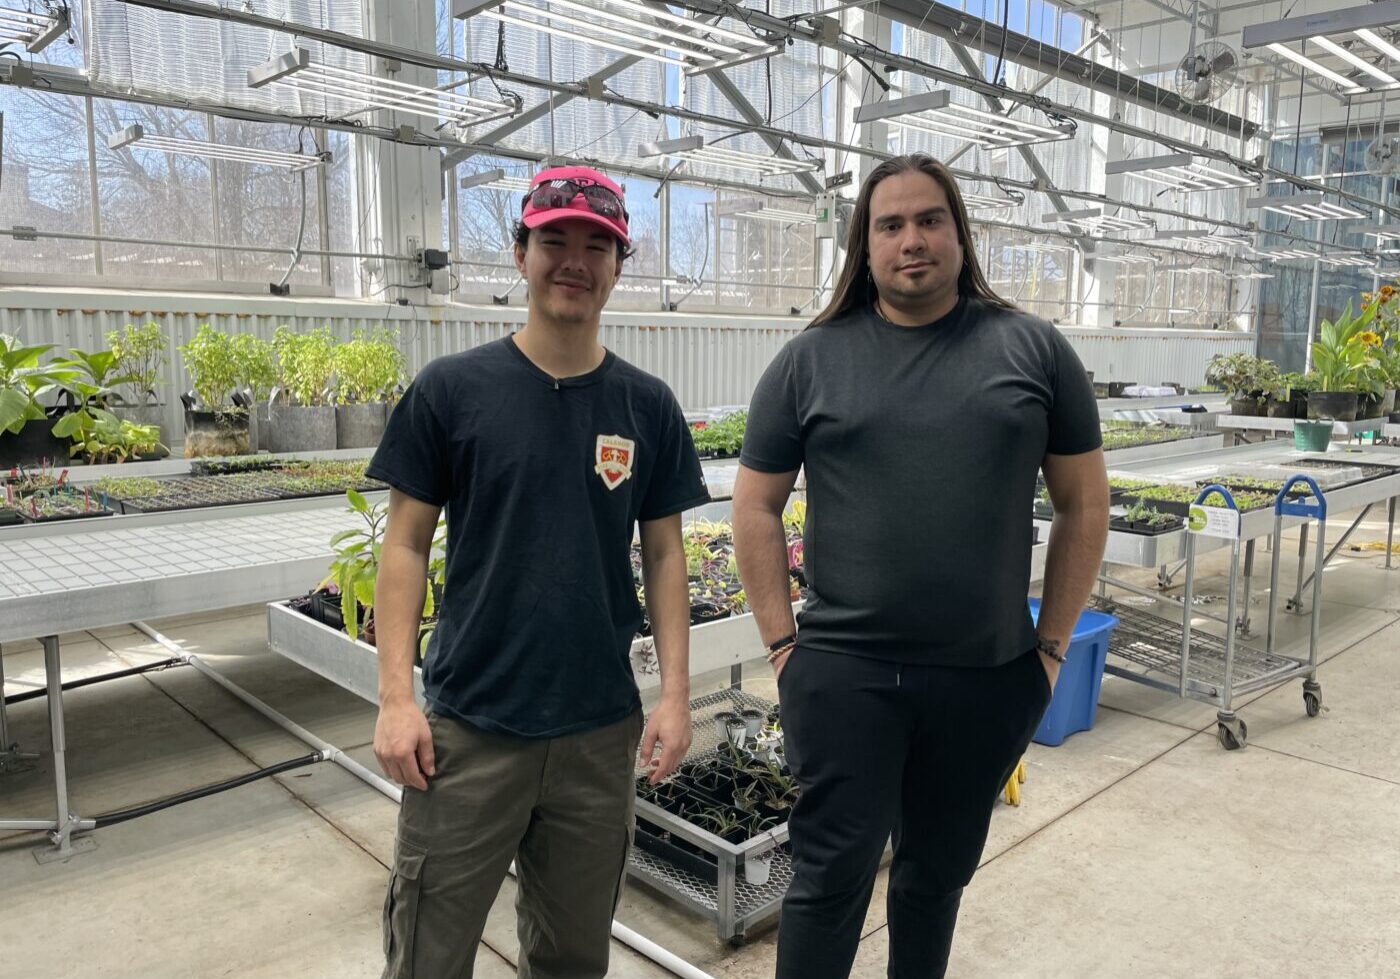 Mashkikiiaki'ng garden coordinators Samuel Wong (pictured left) and Magpie Arancibia (pictured right) stand in The Stop’s greenhouse.